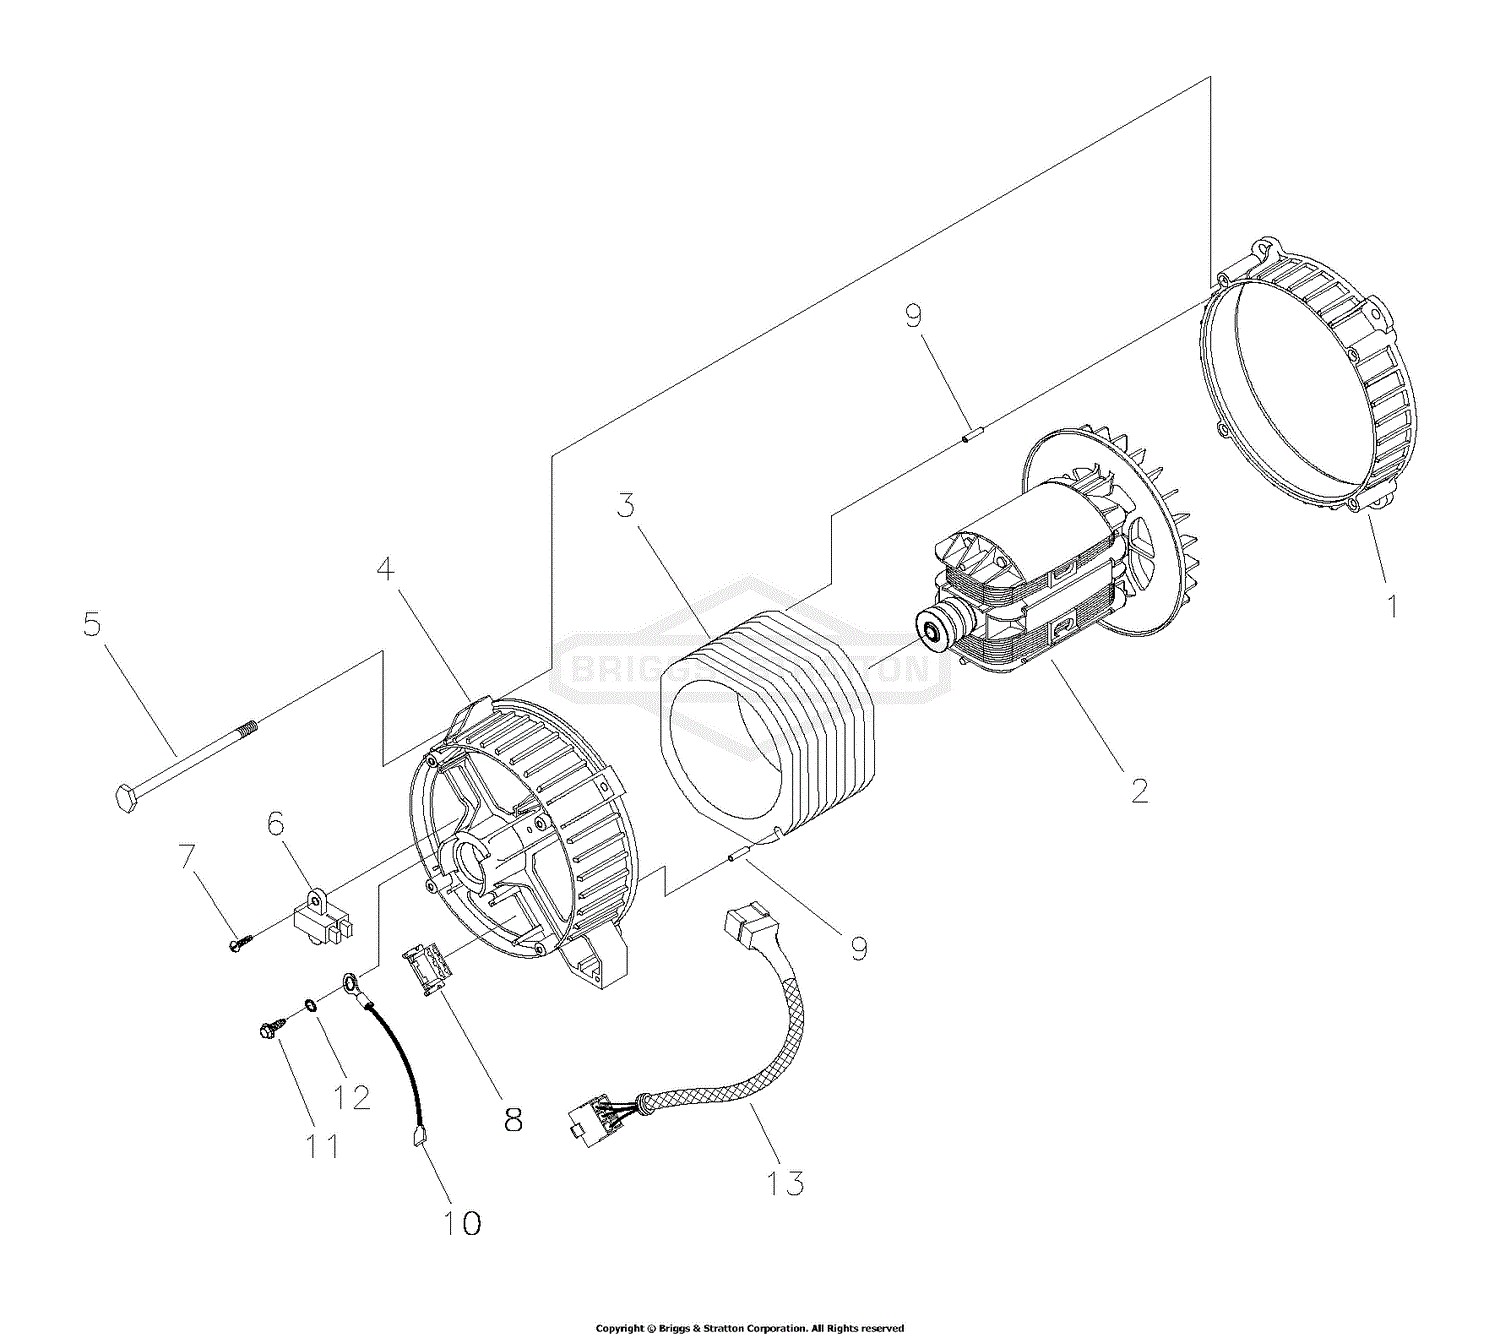 Briggs and Stratton Alternator Wiring Diagram Briggs and Stratton Power Products 1924 0 3 550 Watt Troy Of Briggs and Stratton Alternator Wiring Diagram